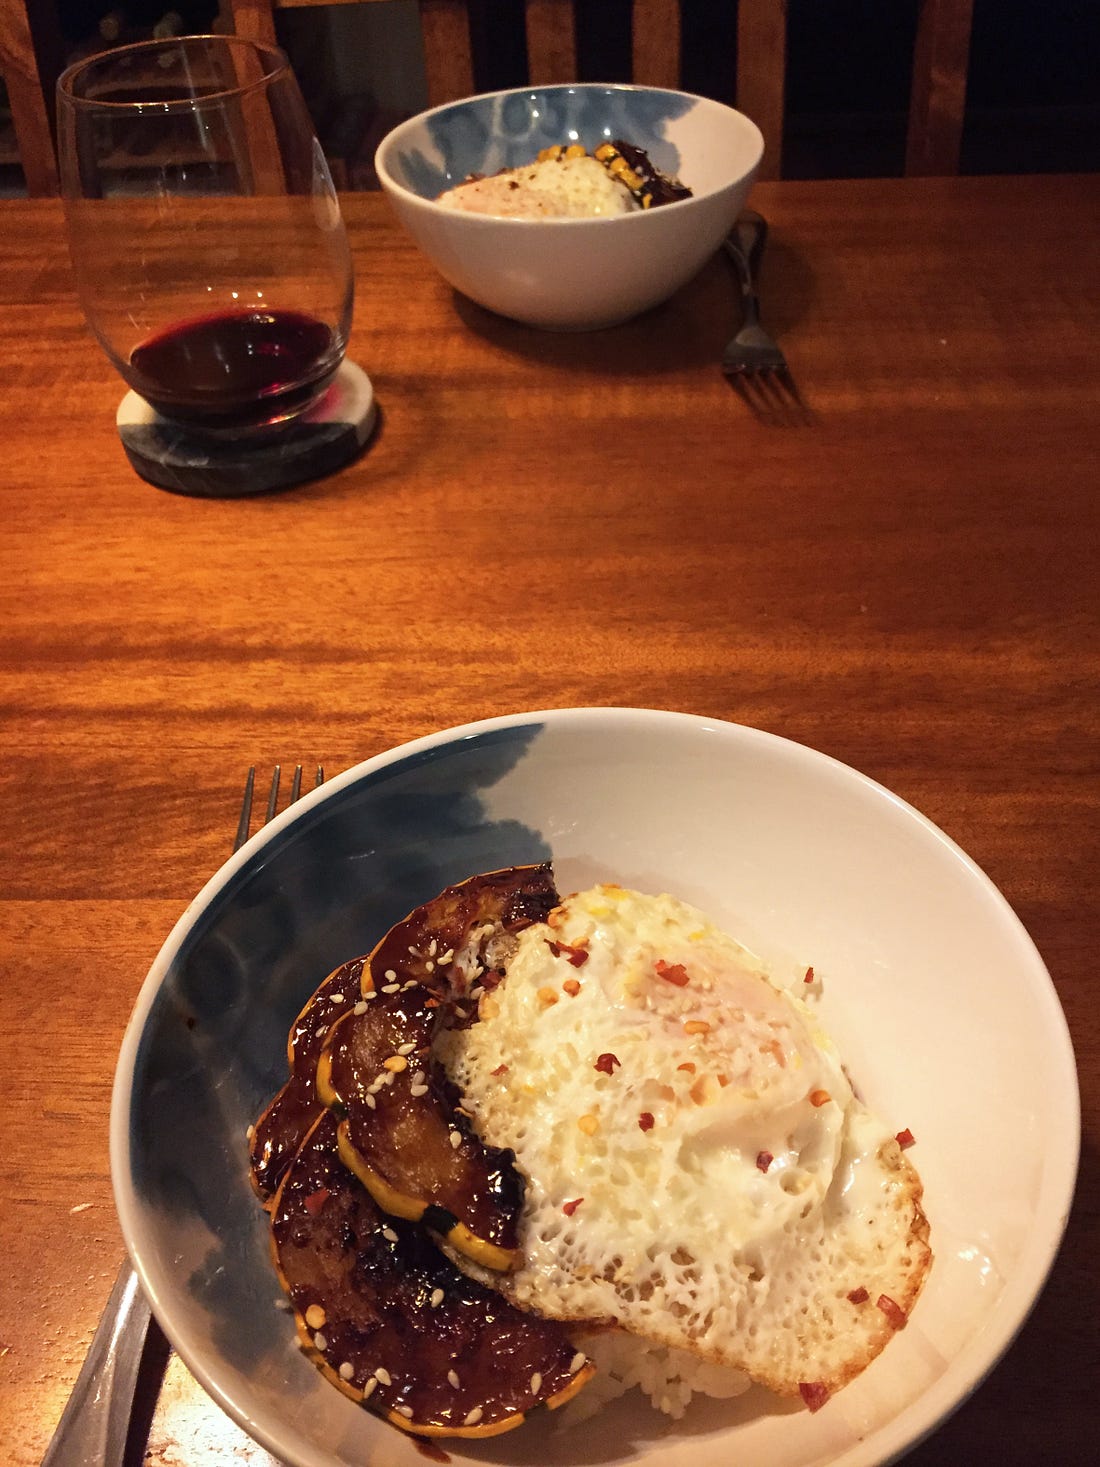 On a wood table, two white and blue bowls sit across from each other, with a stemless glass of red wine at the side. The bowls are filled with rice and topped with half-moons of the hoisin squash, and a fried egg with crispy edges. Sesame seeds and chili flakes are scattered across the top.